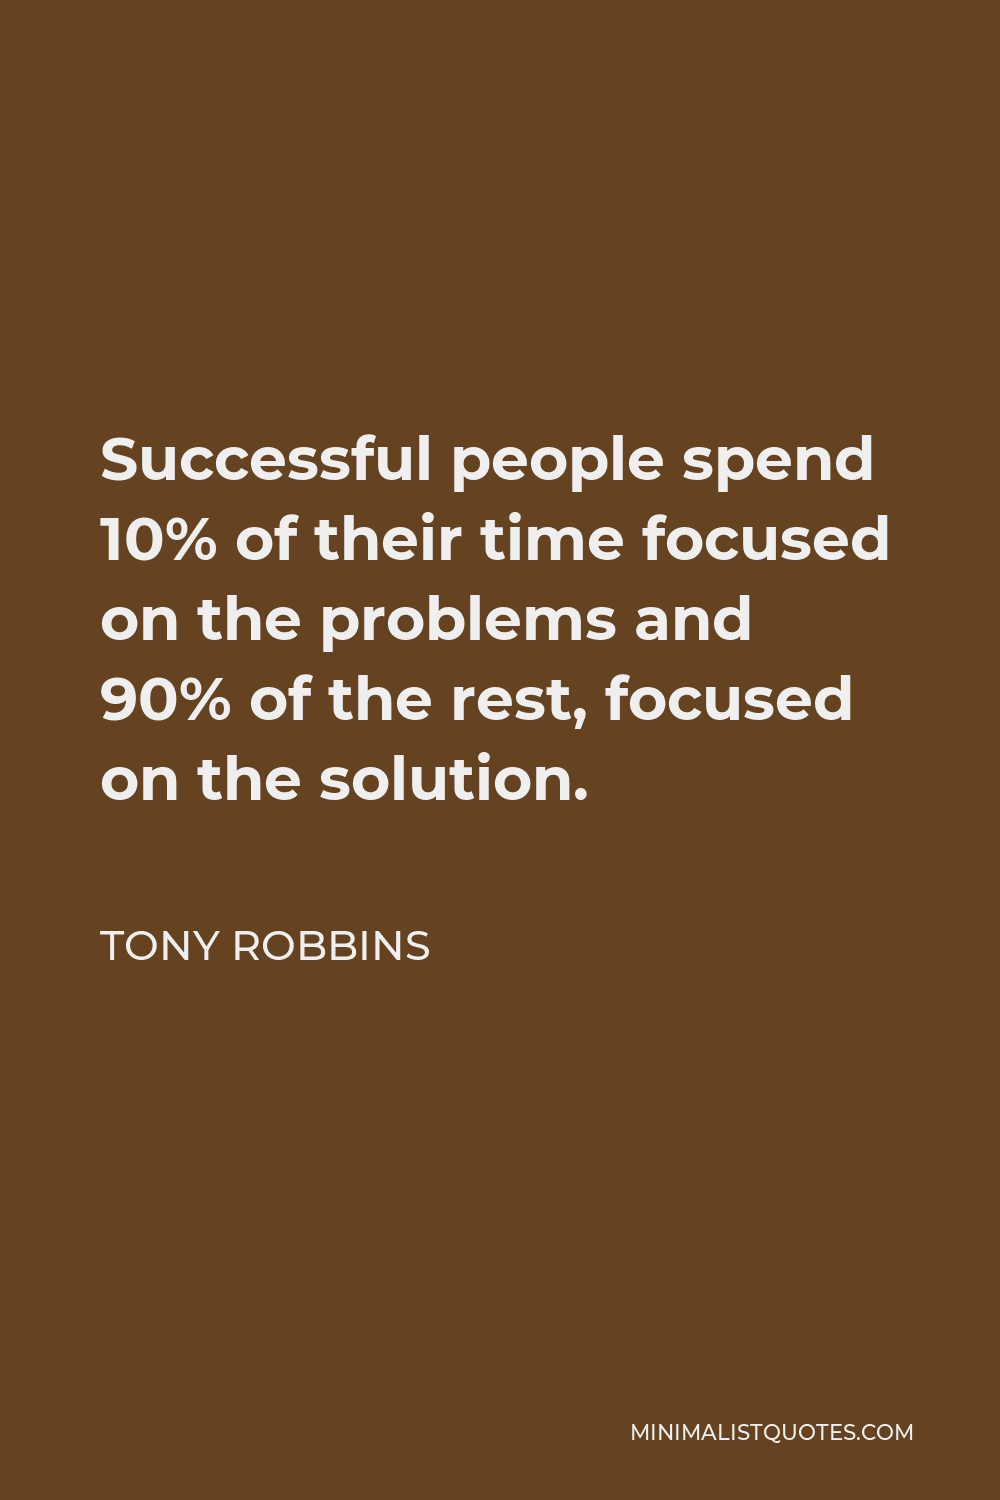 Tony Robbins Quote - Successful people spend 10% of their time focused on the problems and 90% of the rest, focused on the solution.